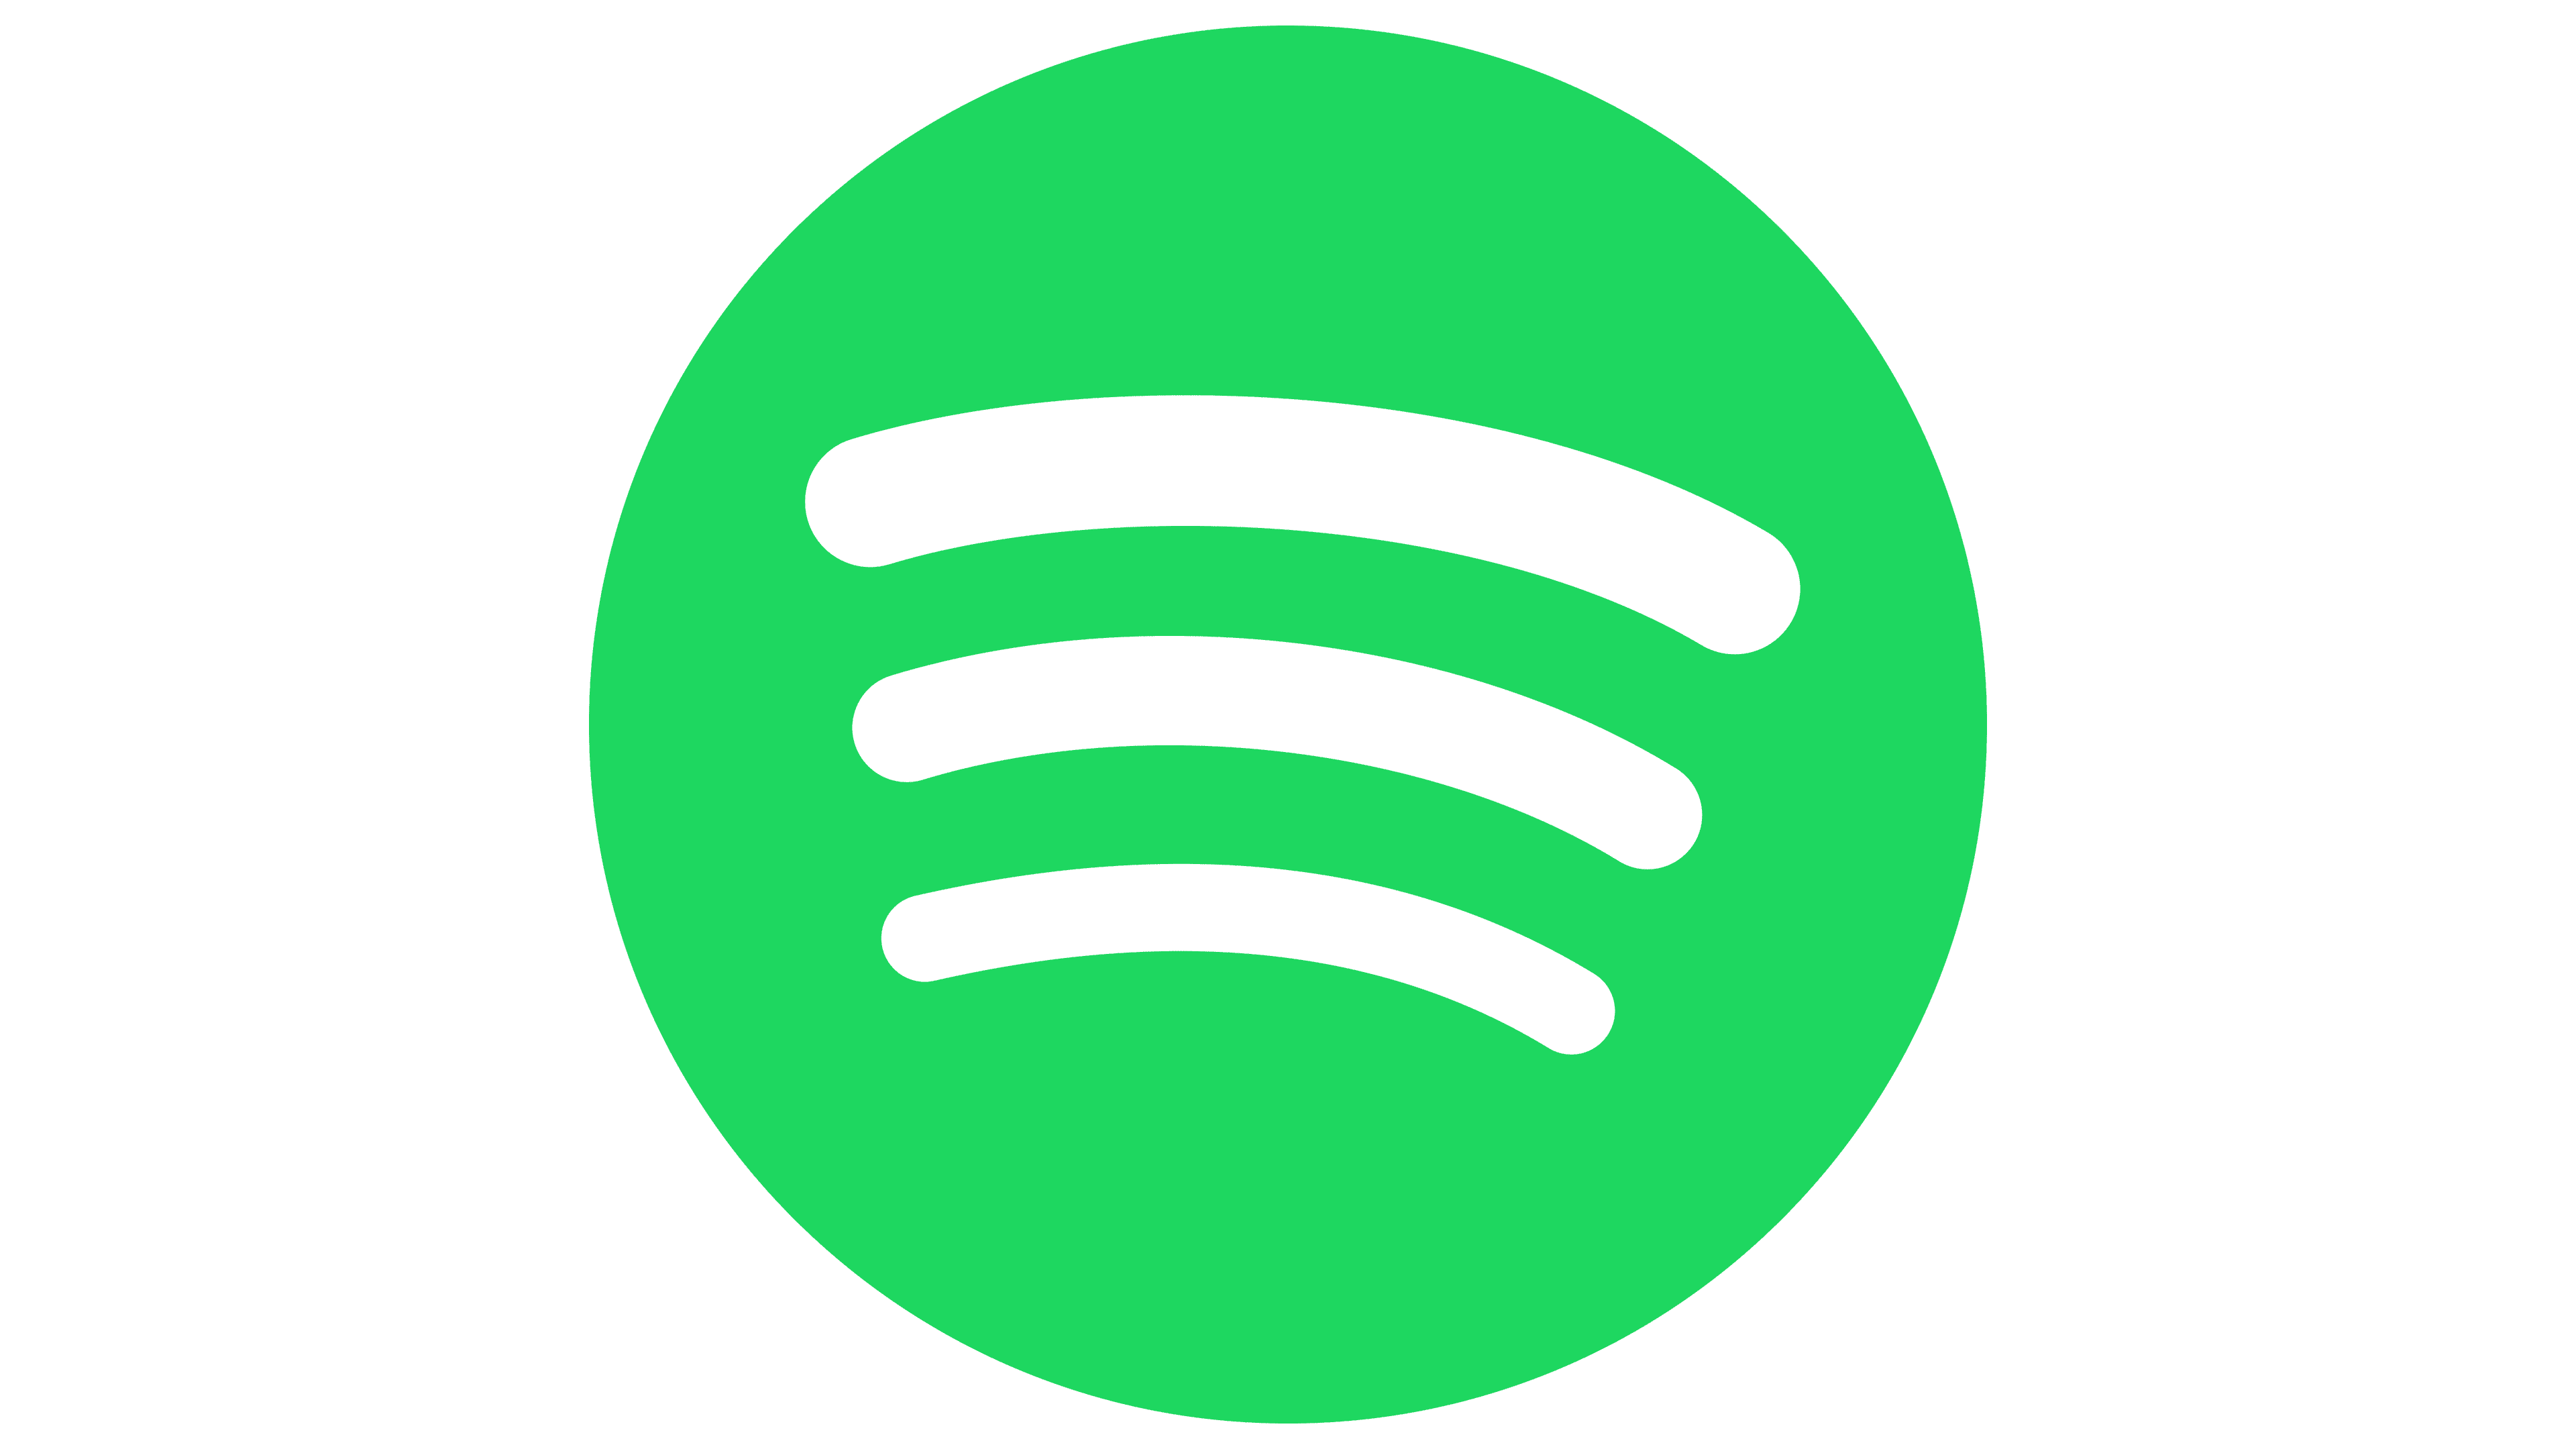 Spotify Logo, symbol, meaning, history, PNG, brand